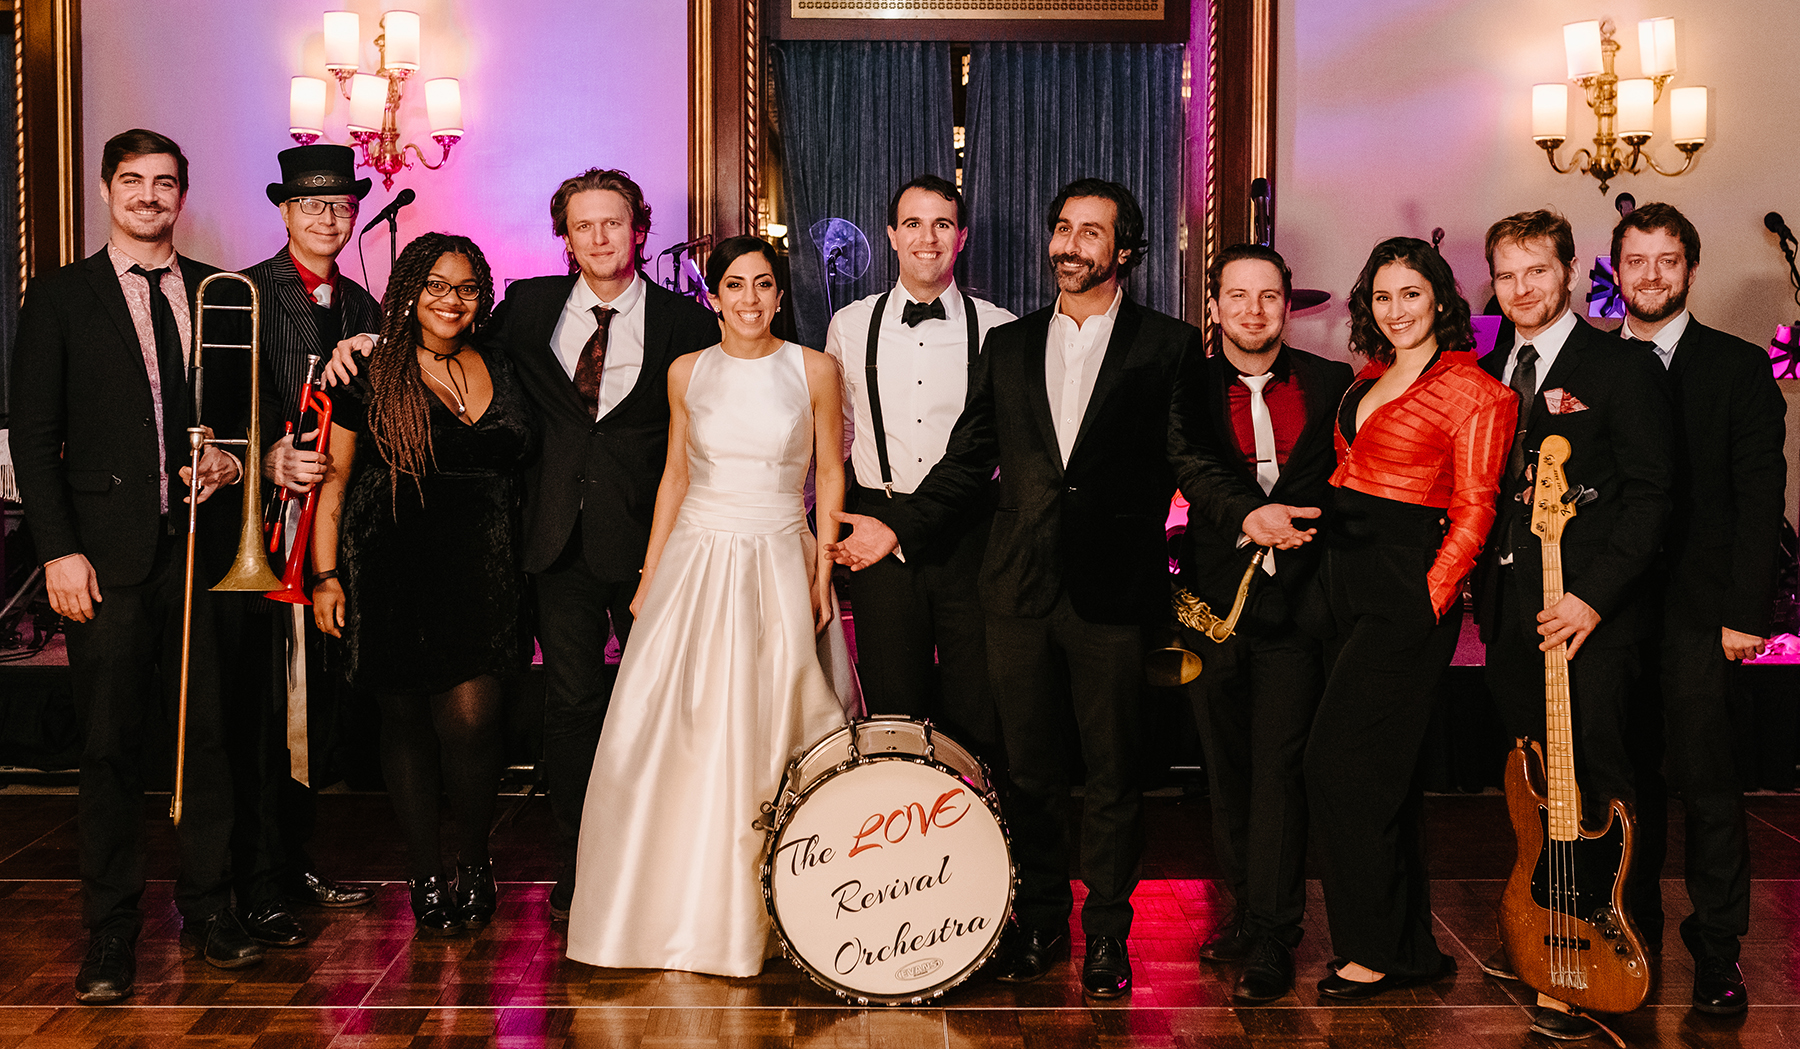 The Love Revival Orchestra